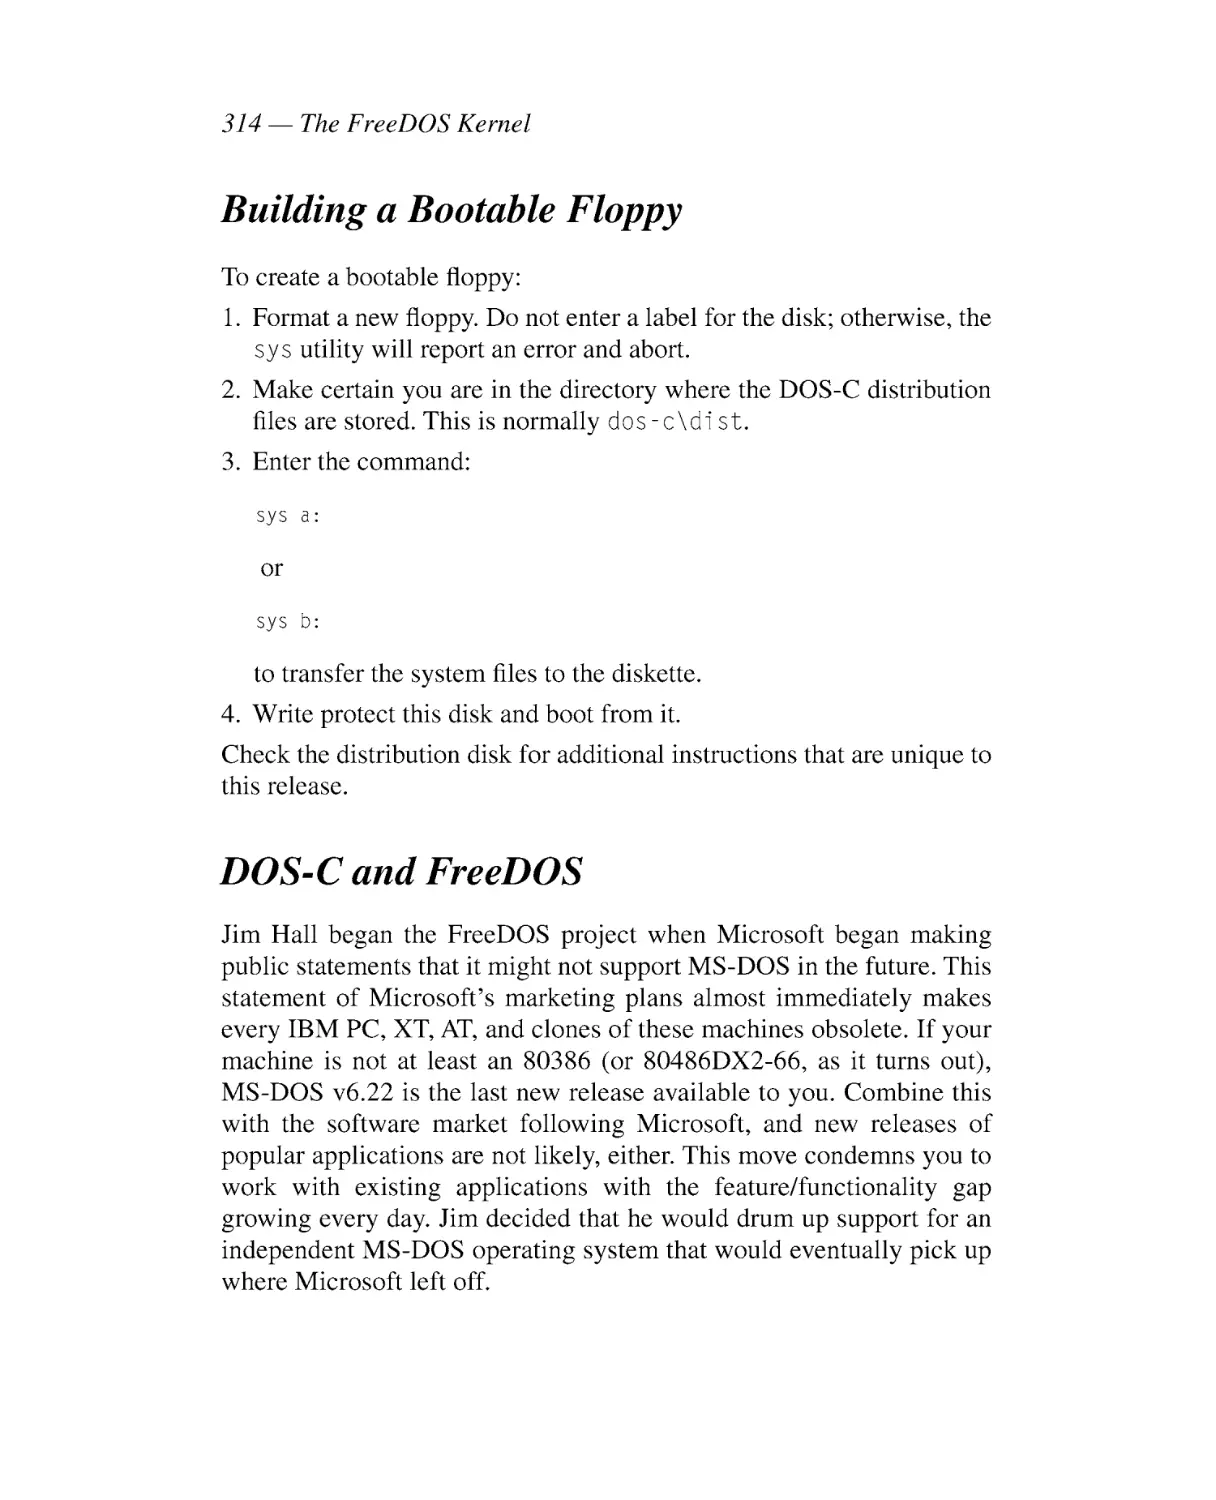 Building a Bootable Floppy
DOS-C and FreeDOS